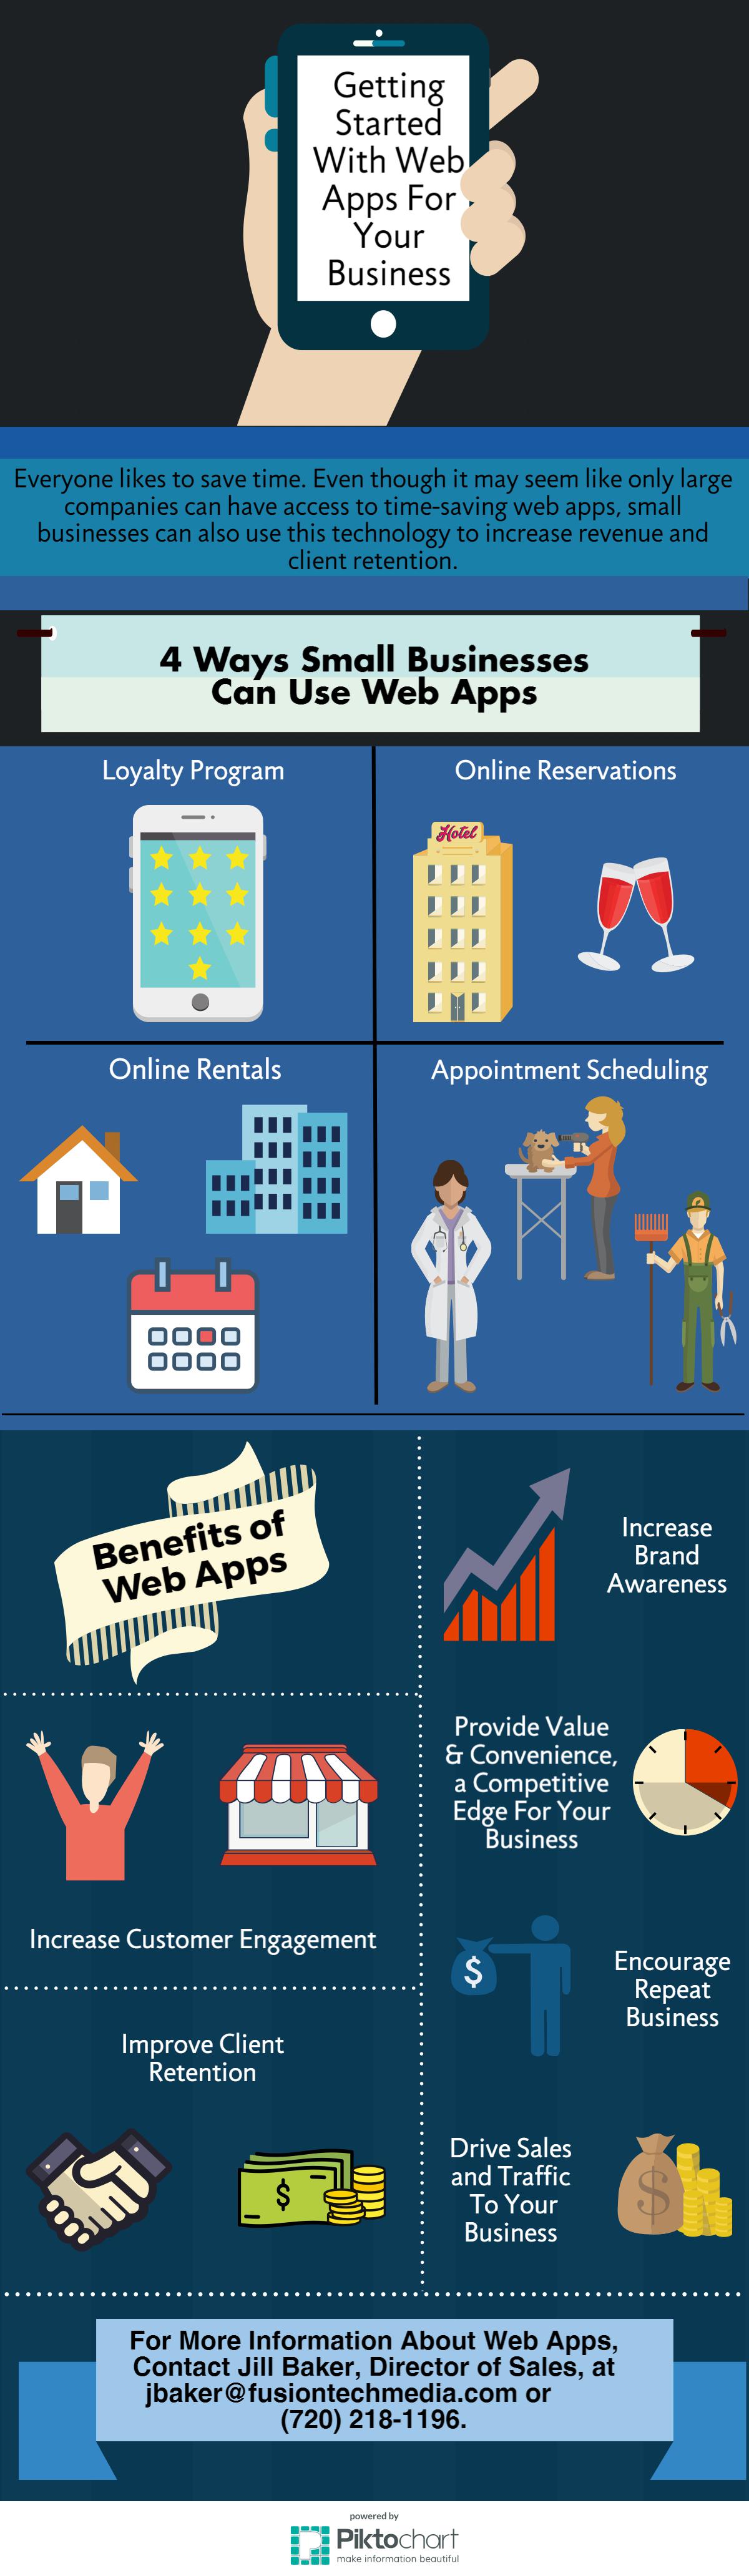 Web Apps Infographic